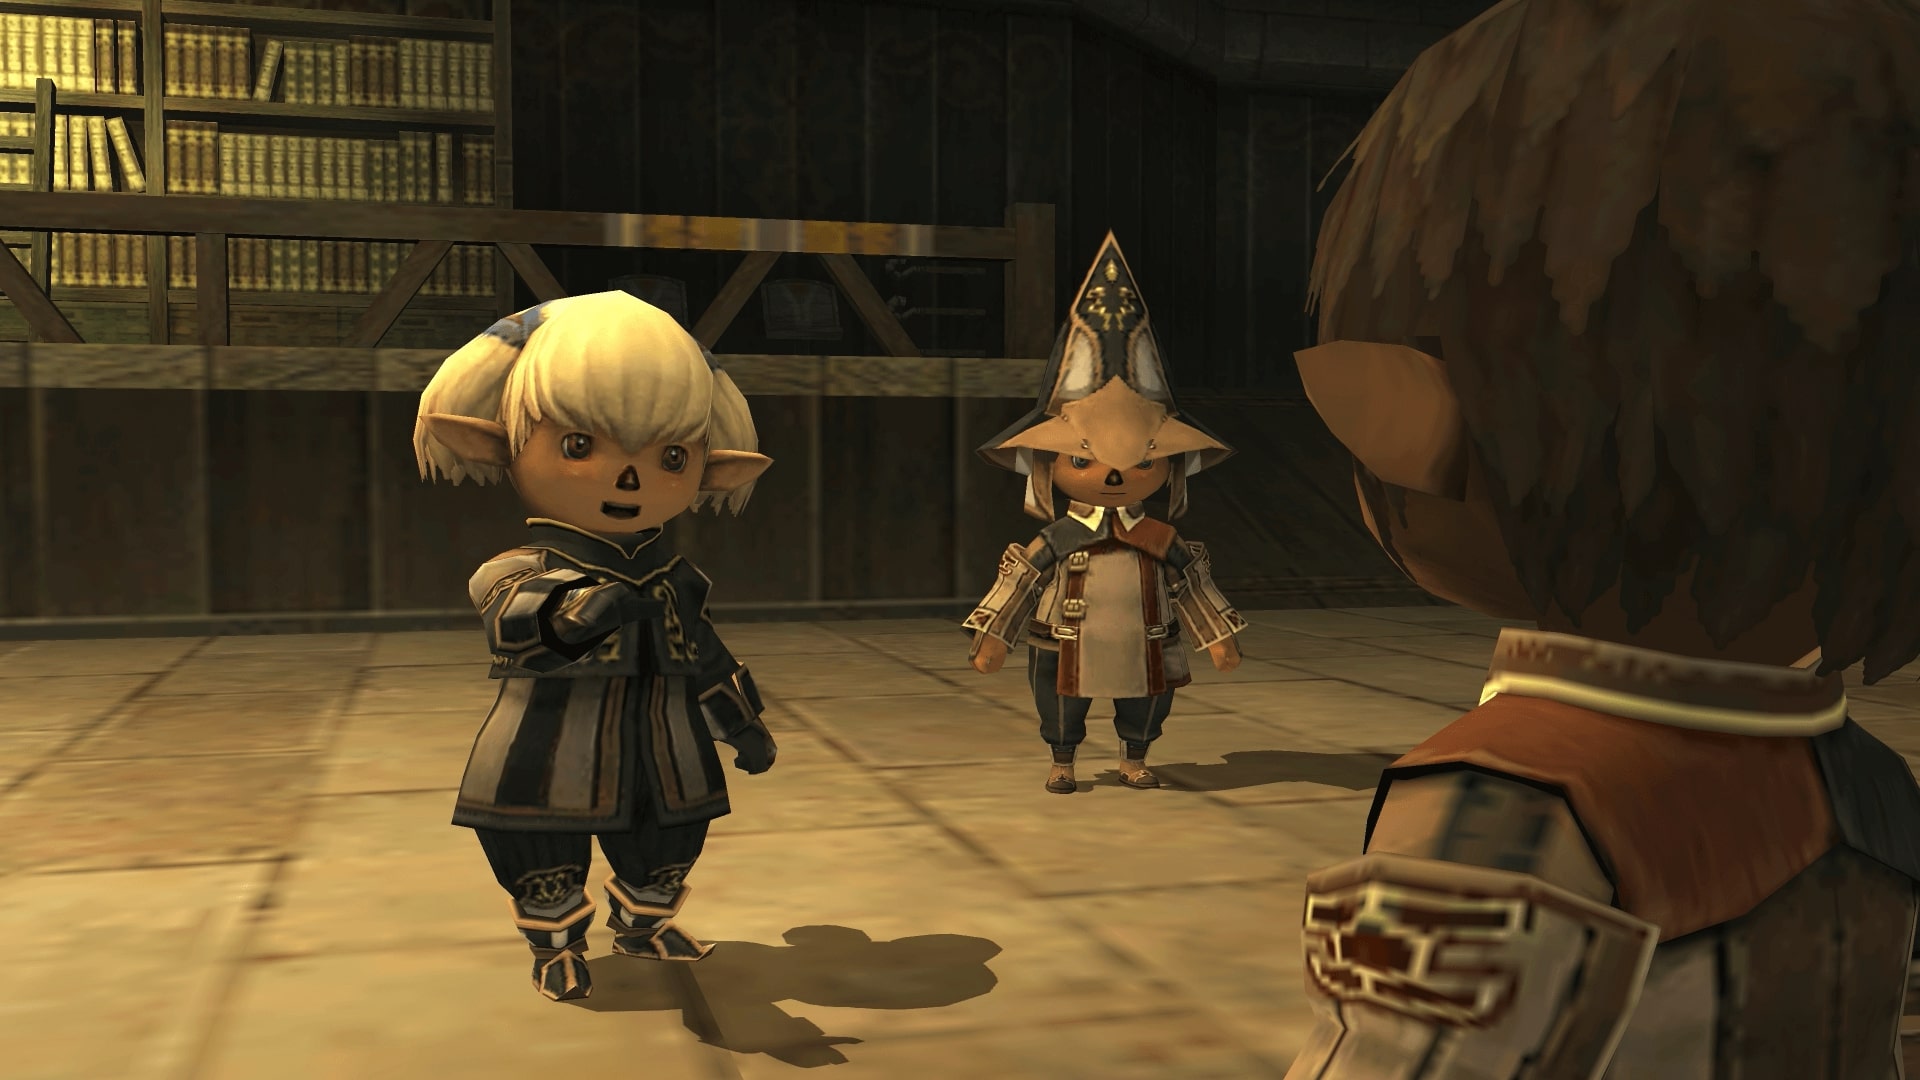 Shantotto in the latest Final Fantasy XI campaign